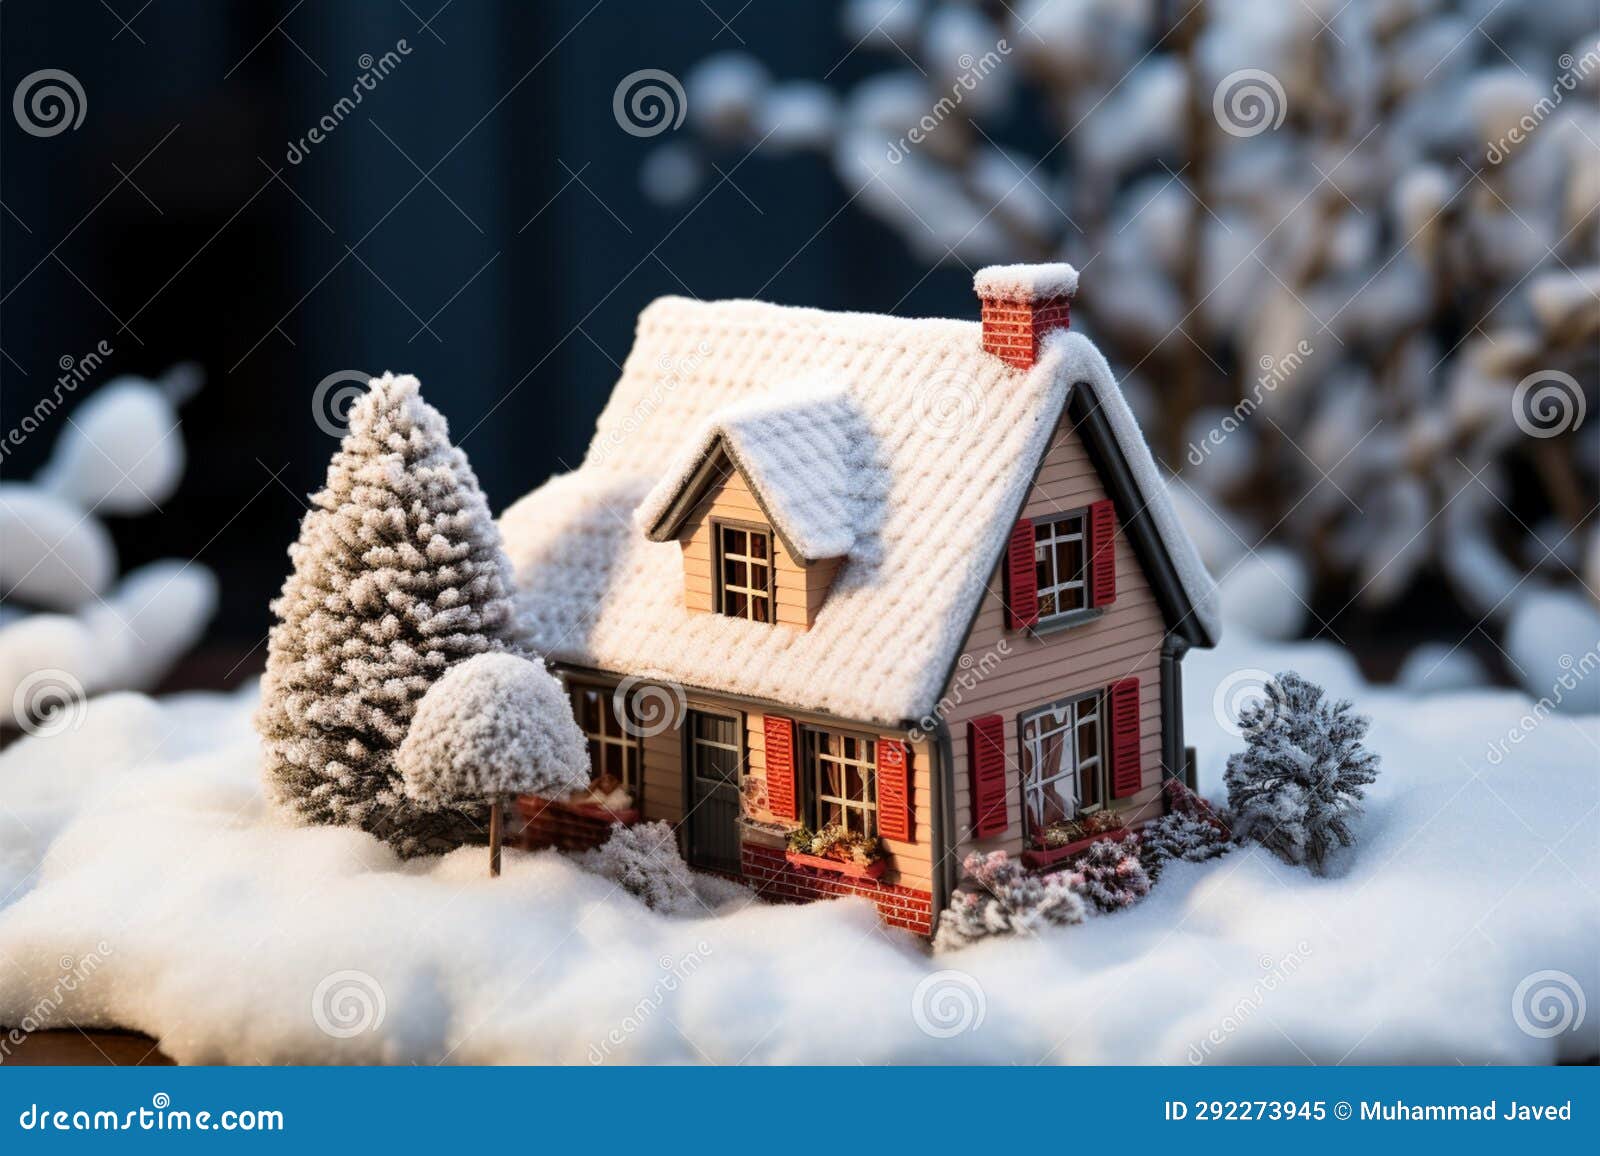 house model in a snowy setting, emphasizing winter heating concept